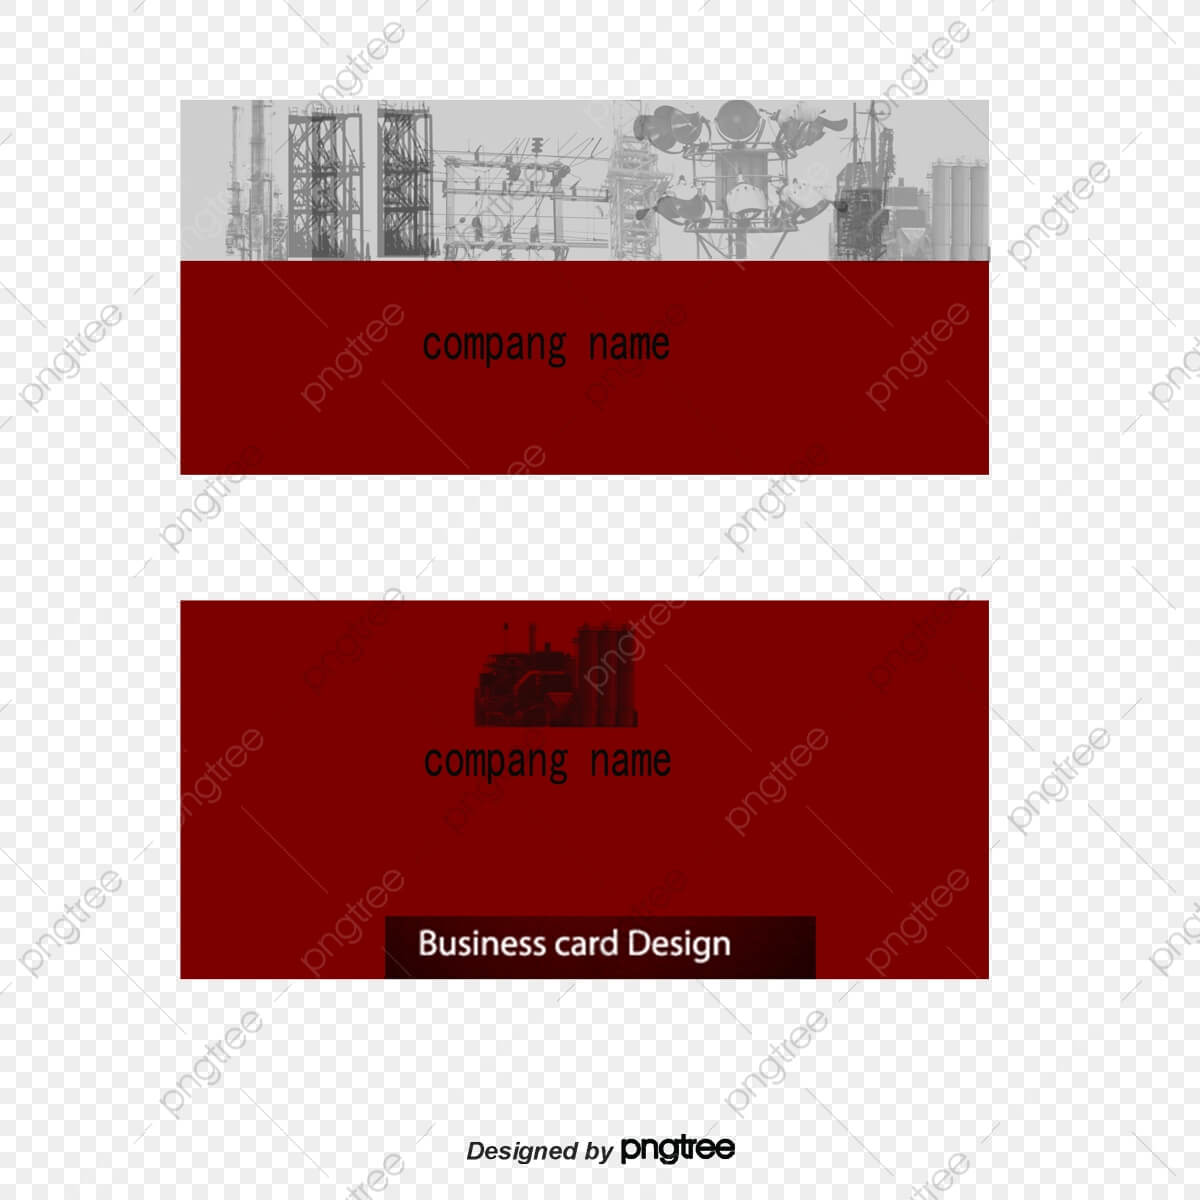 Construction Business Card, Business Card, Business Cards Throughout Construction Business Card Templates Download Free